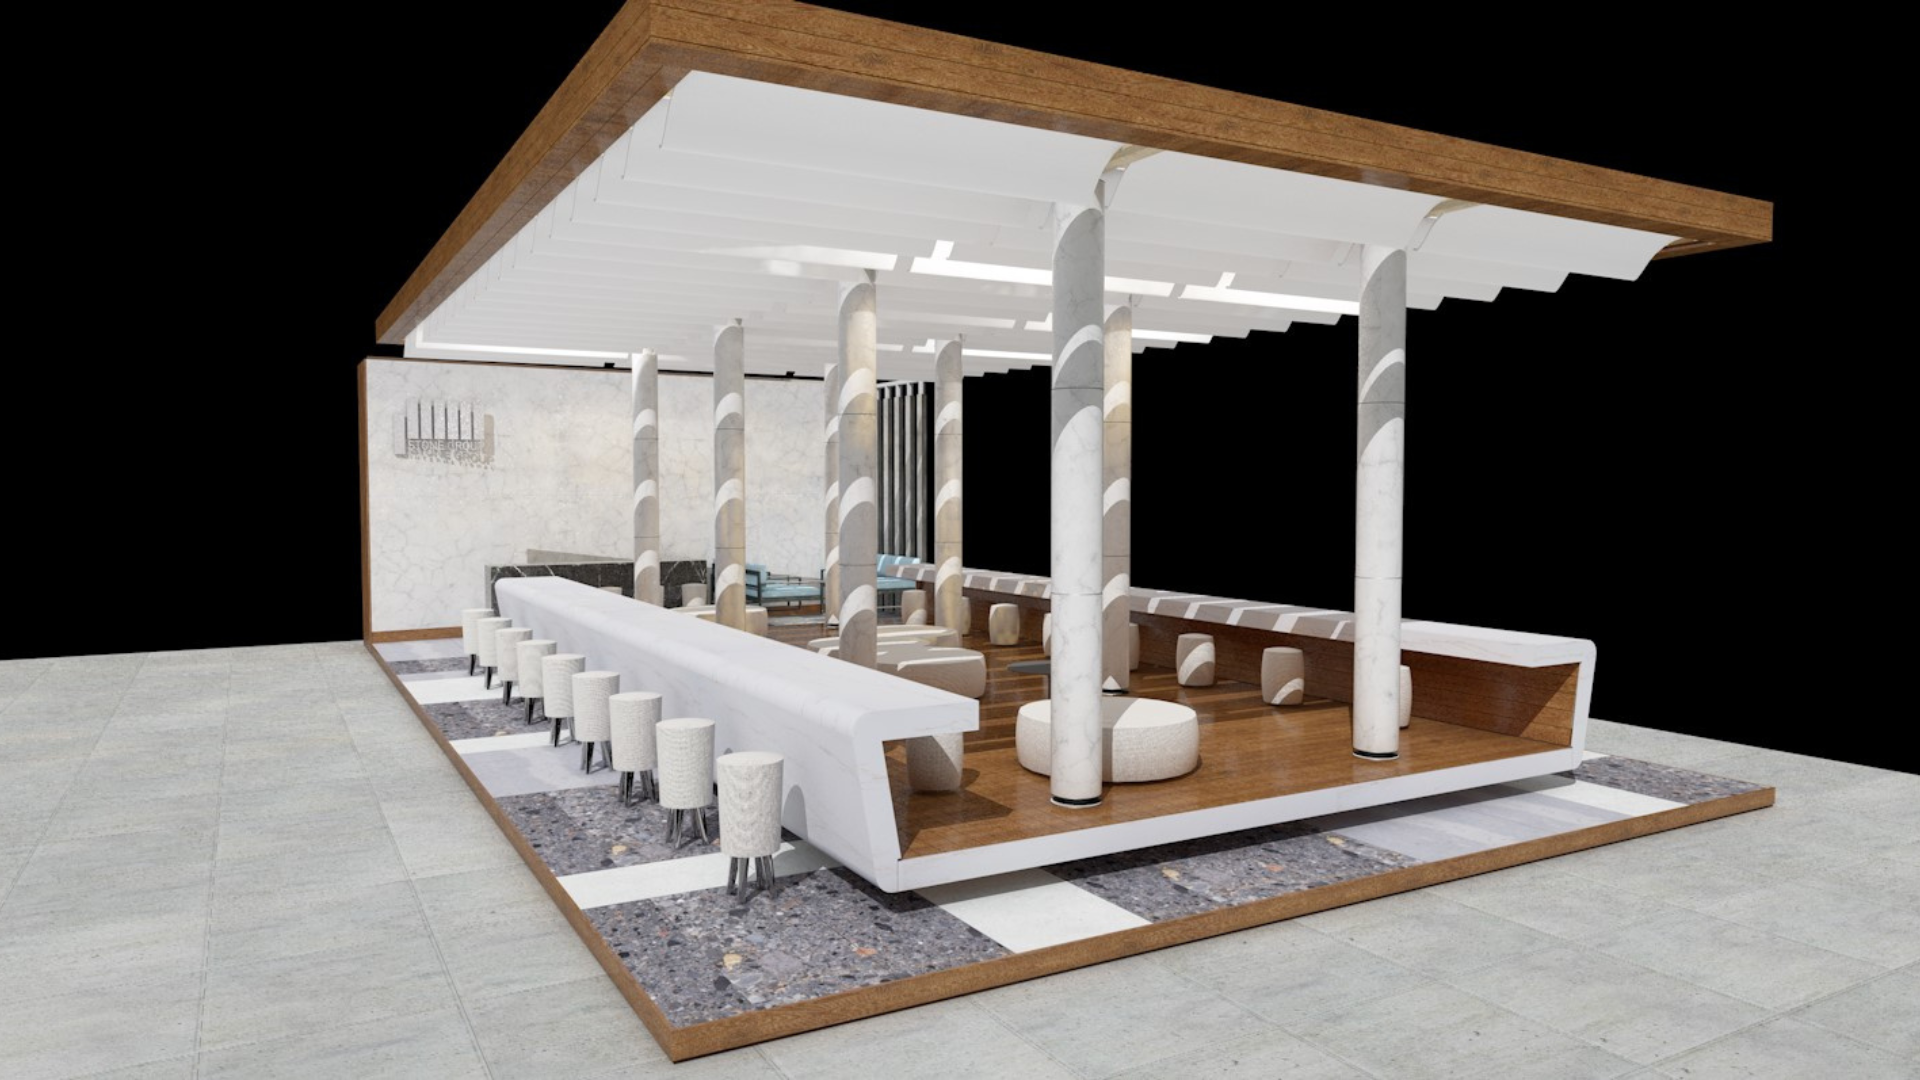 Mockup of hall 6 stand D2 at Marmomac Verona fiere, with natural materials such as wood and marble and design concept dedicated to synergy of humans and nature.Stone Group International At Marmomac.